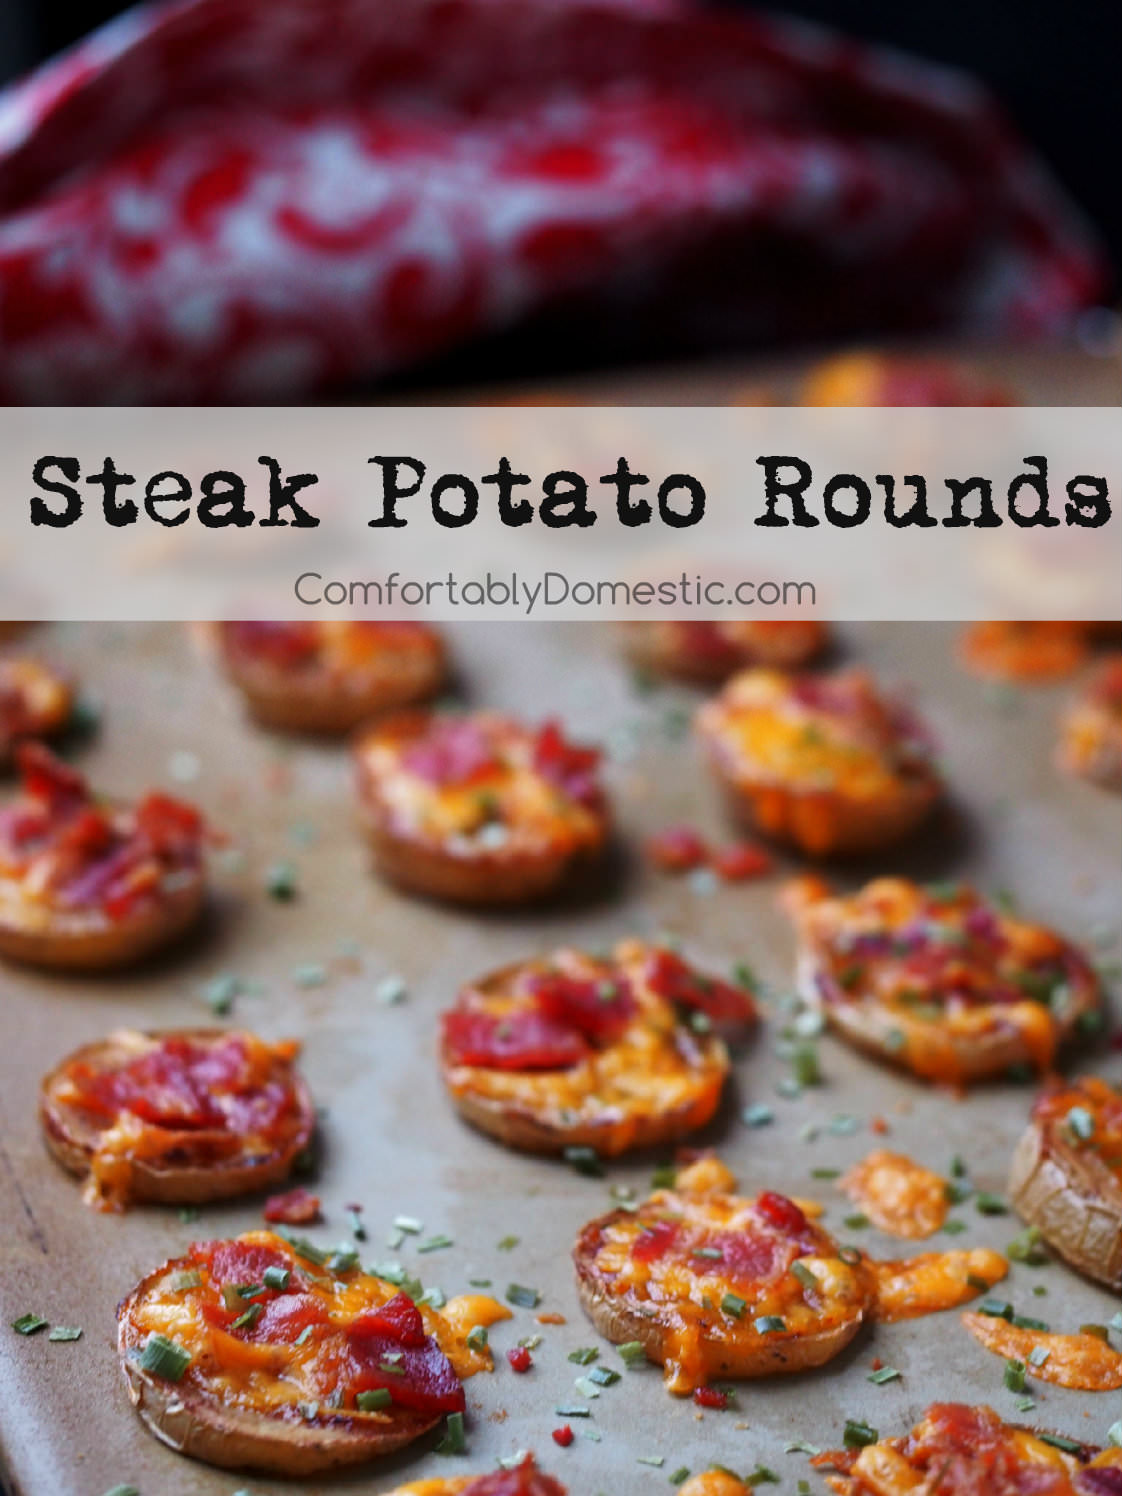 Steak potato rounds have the taste of a loaded baked potato in a two-bite appetizer. Bake sliced yellow potato rounds to tender perfection, then smother them with steak sauce, aged cheddar cheese, crisp bacon, and chives.  | ComfortablyDomestic.com